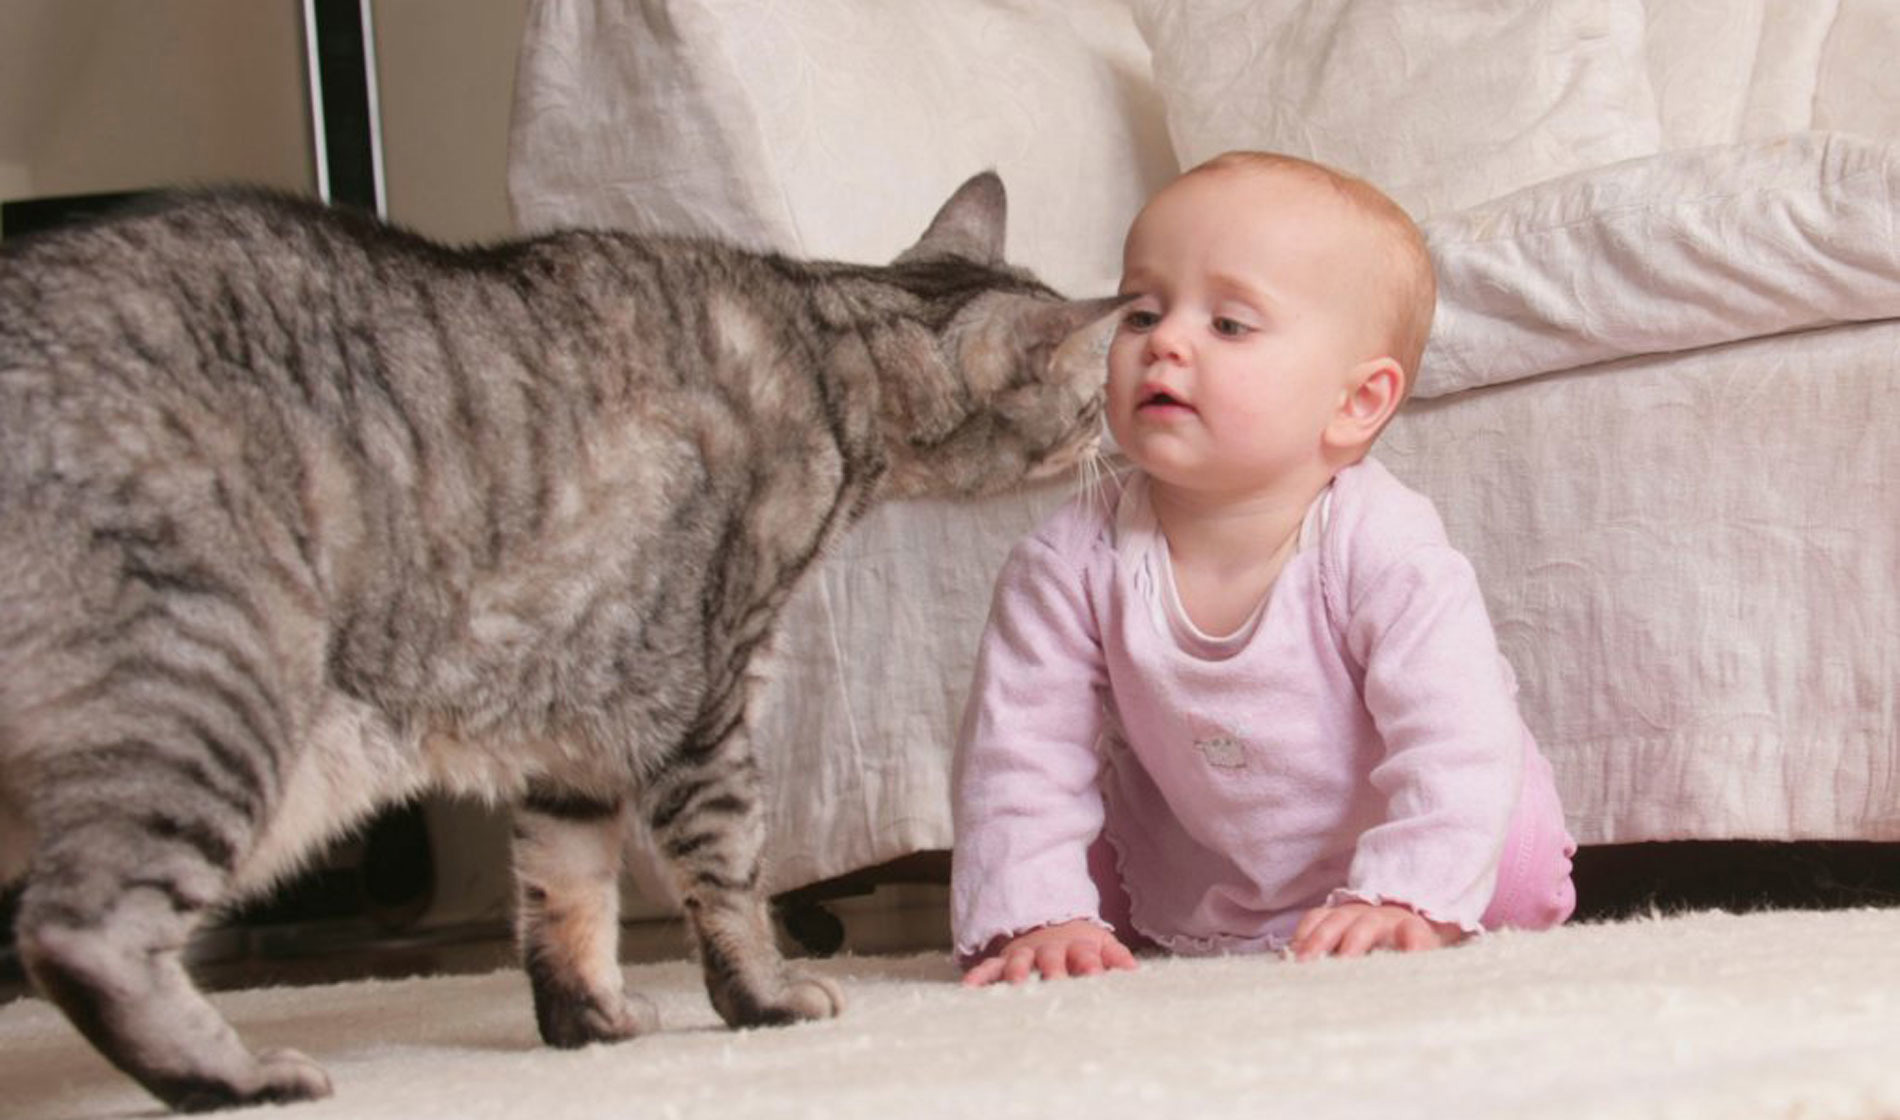 Cats and babies